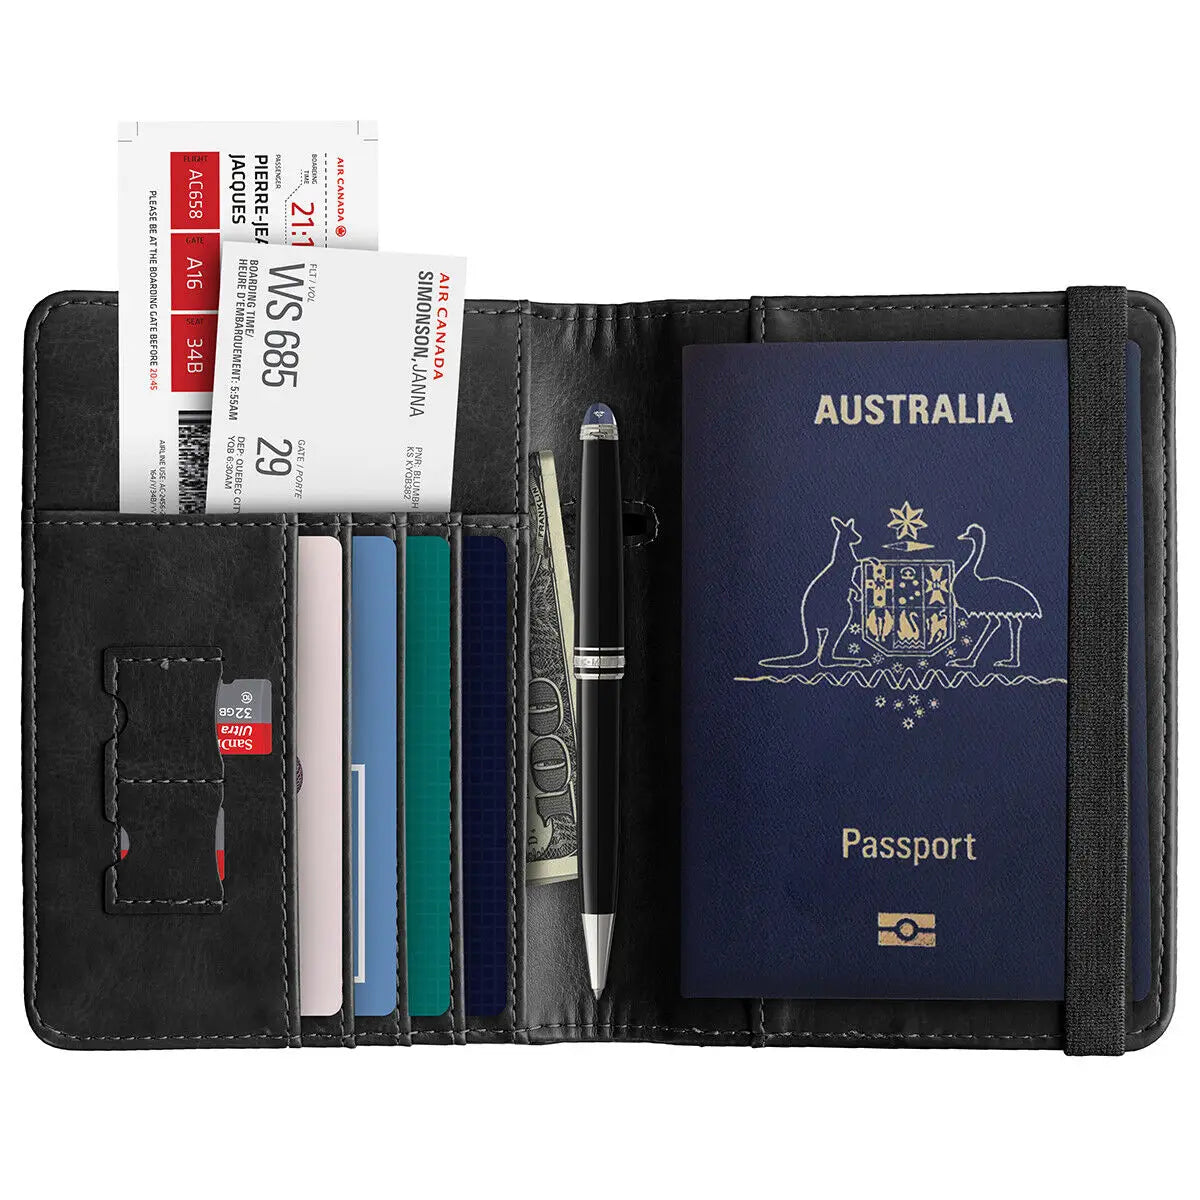 Black RFID travel wallet with boarding pass, cash, credit cards, pen, sim cards & passport